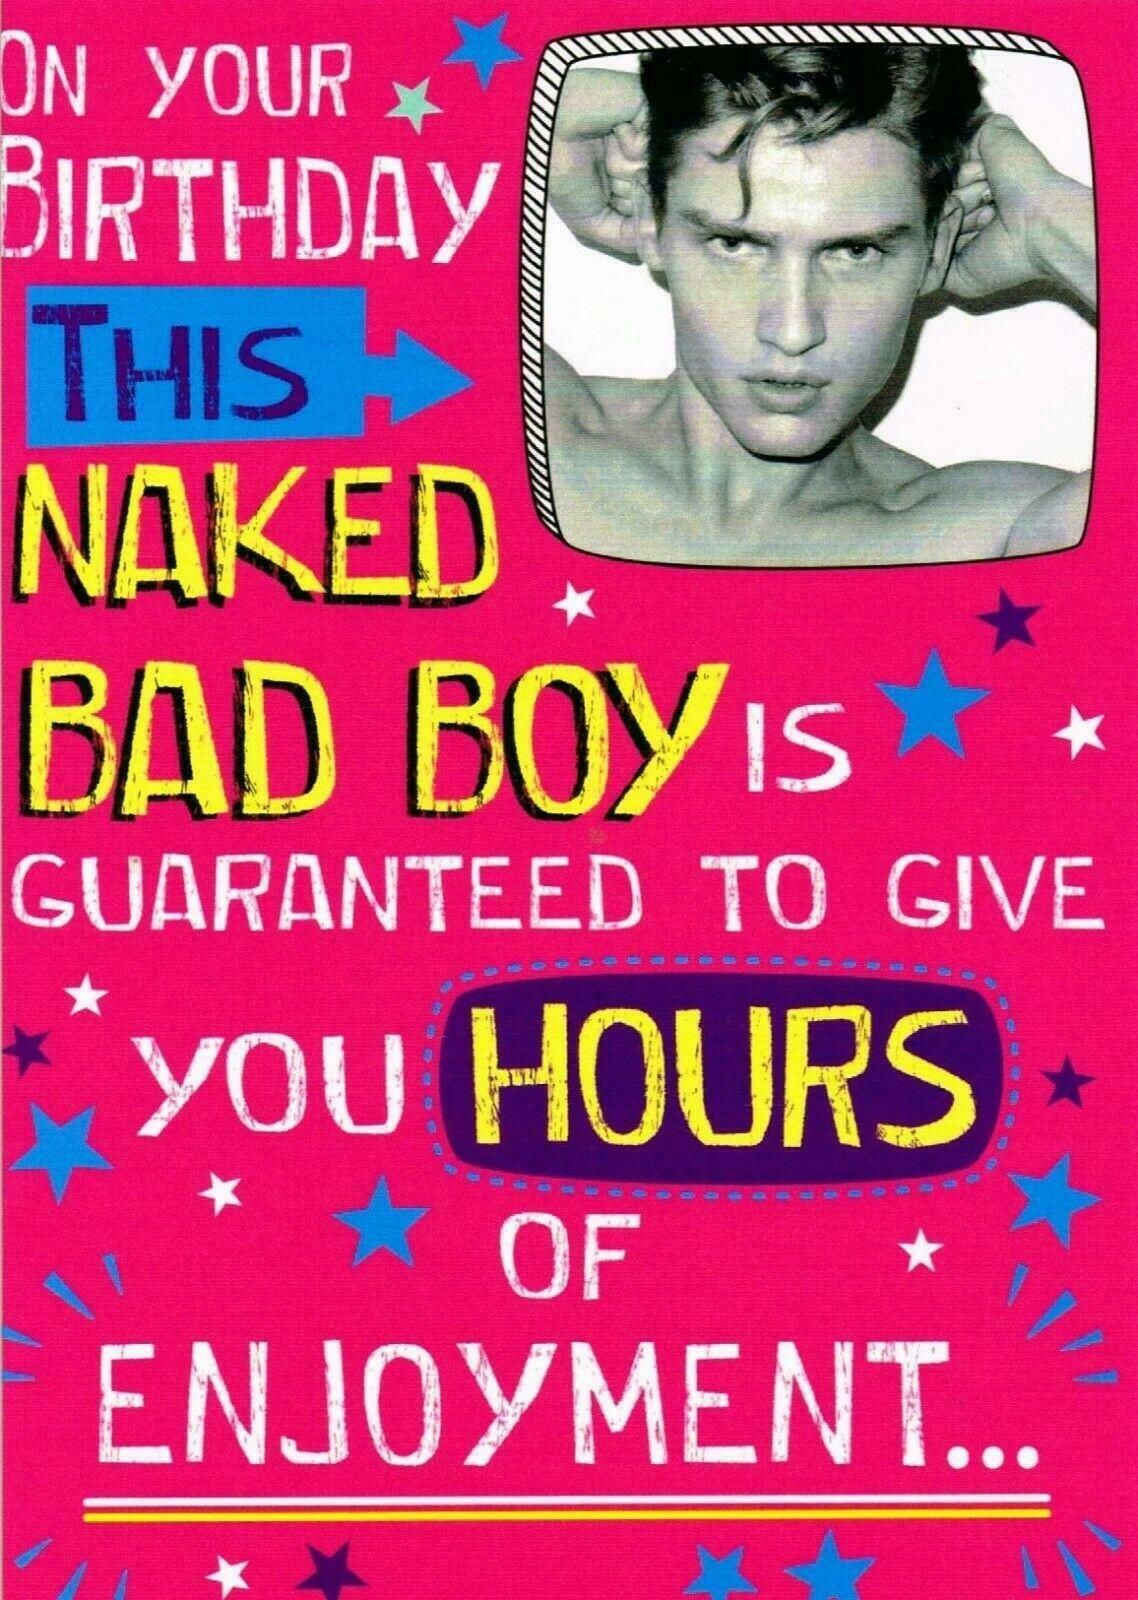 This Naked Bad Boy Is Guaranteed To Give You ... Birthday Card